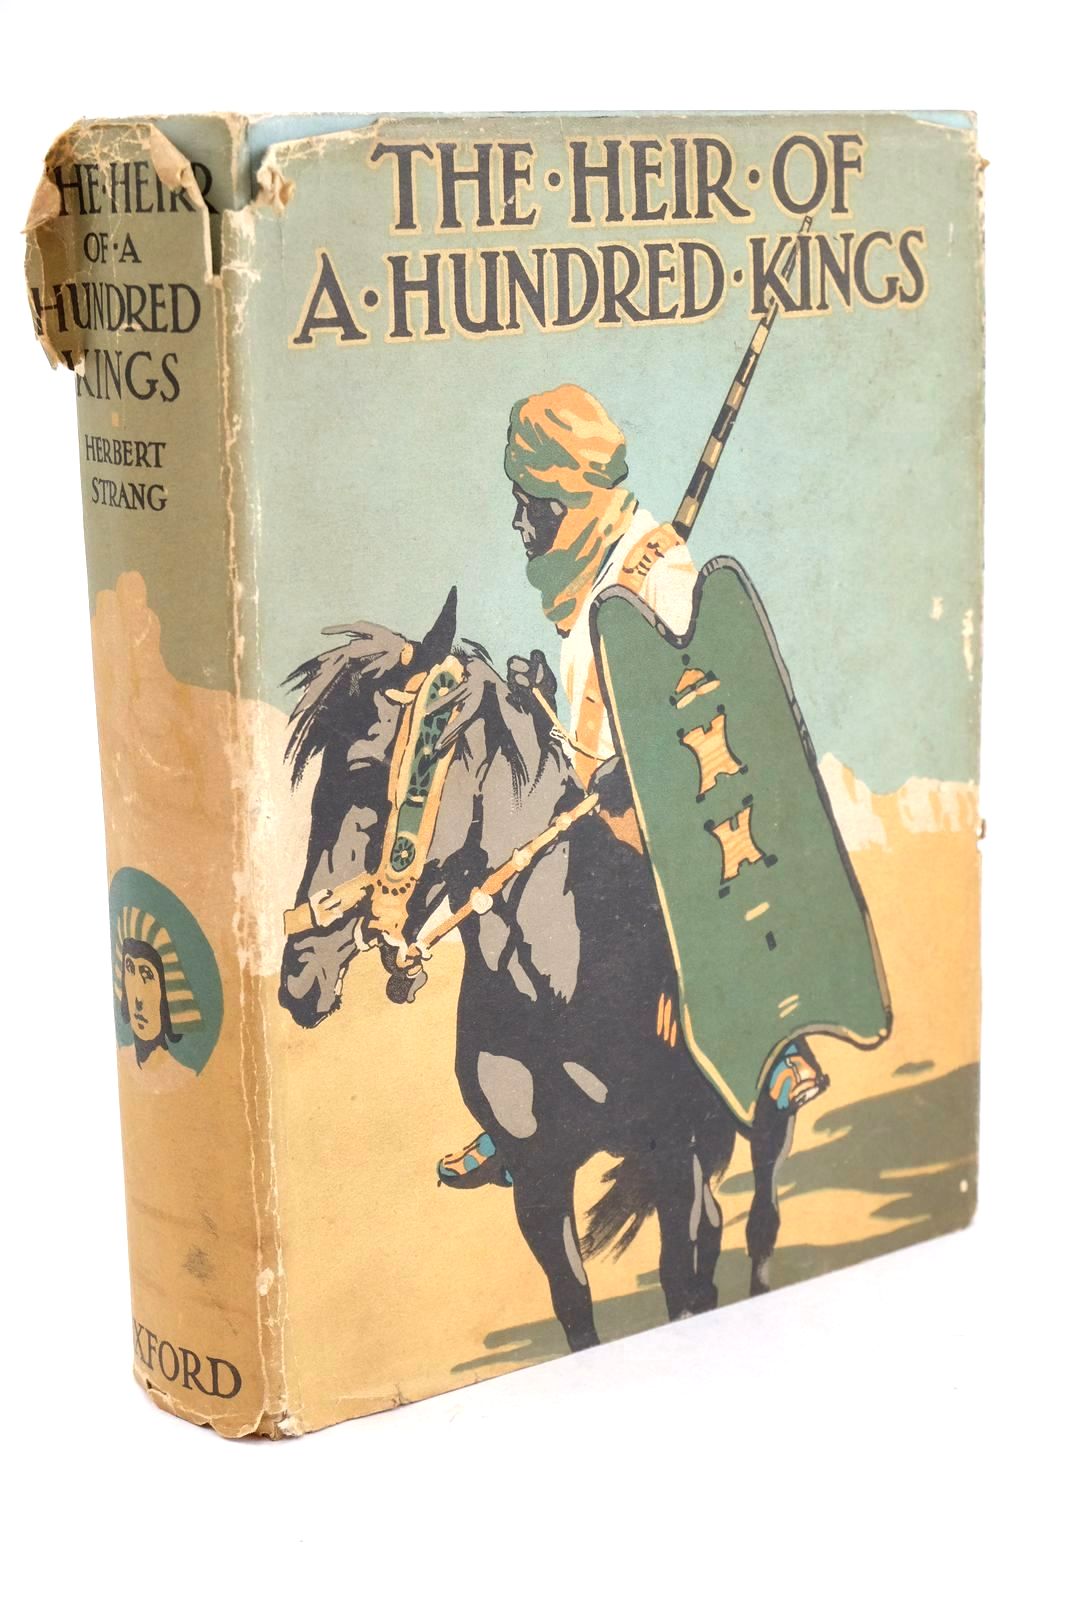 Photo of THE HEIR OF A HUNDRED KINGS written by Strang, Herbert published by Oxford University Press, Humphrey Milford (STOCK CODE: 1325227)  for sale by Stella & Rose's Books